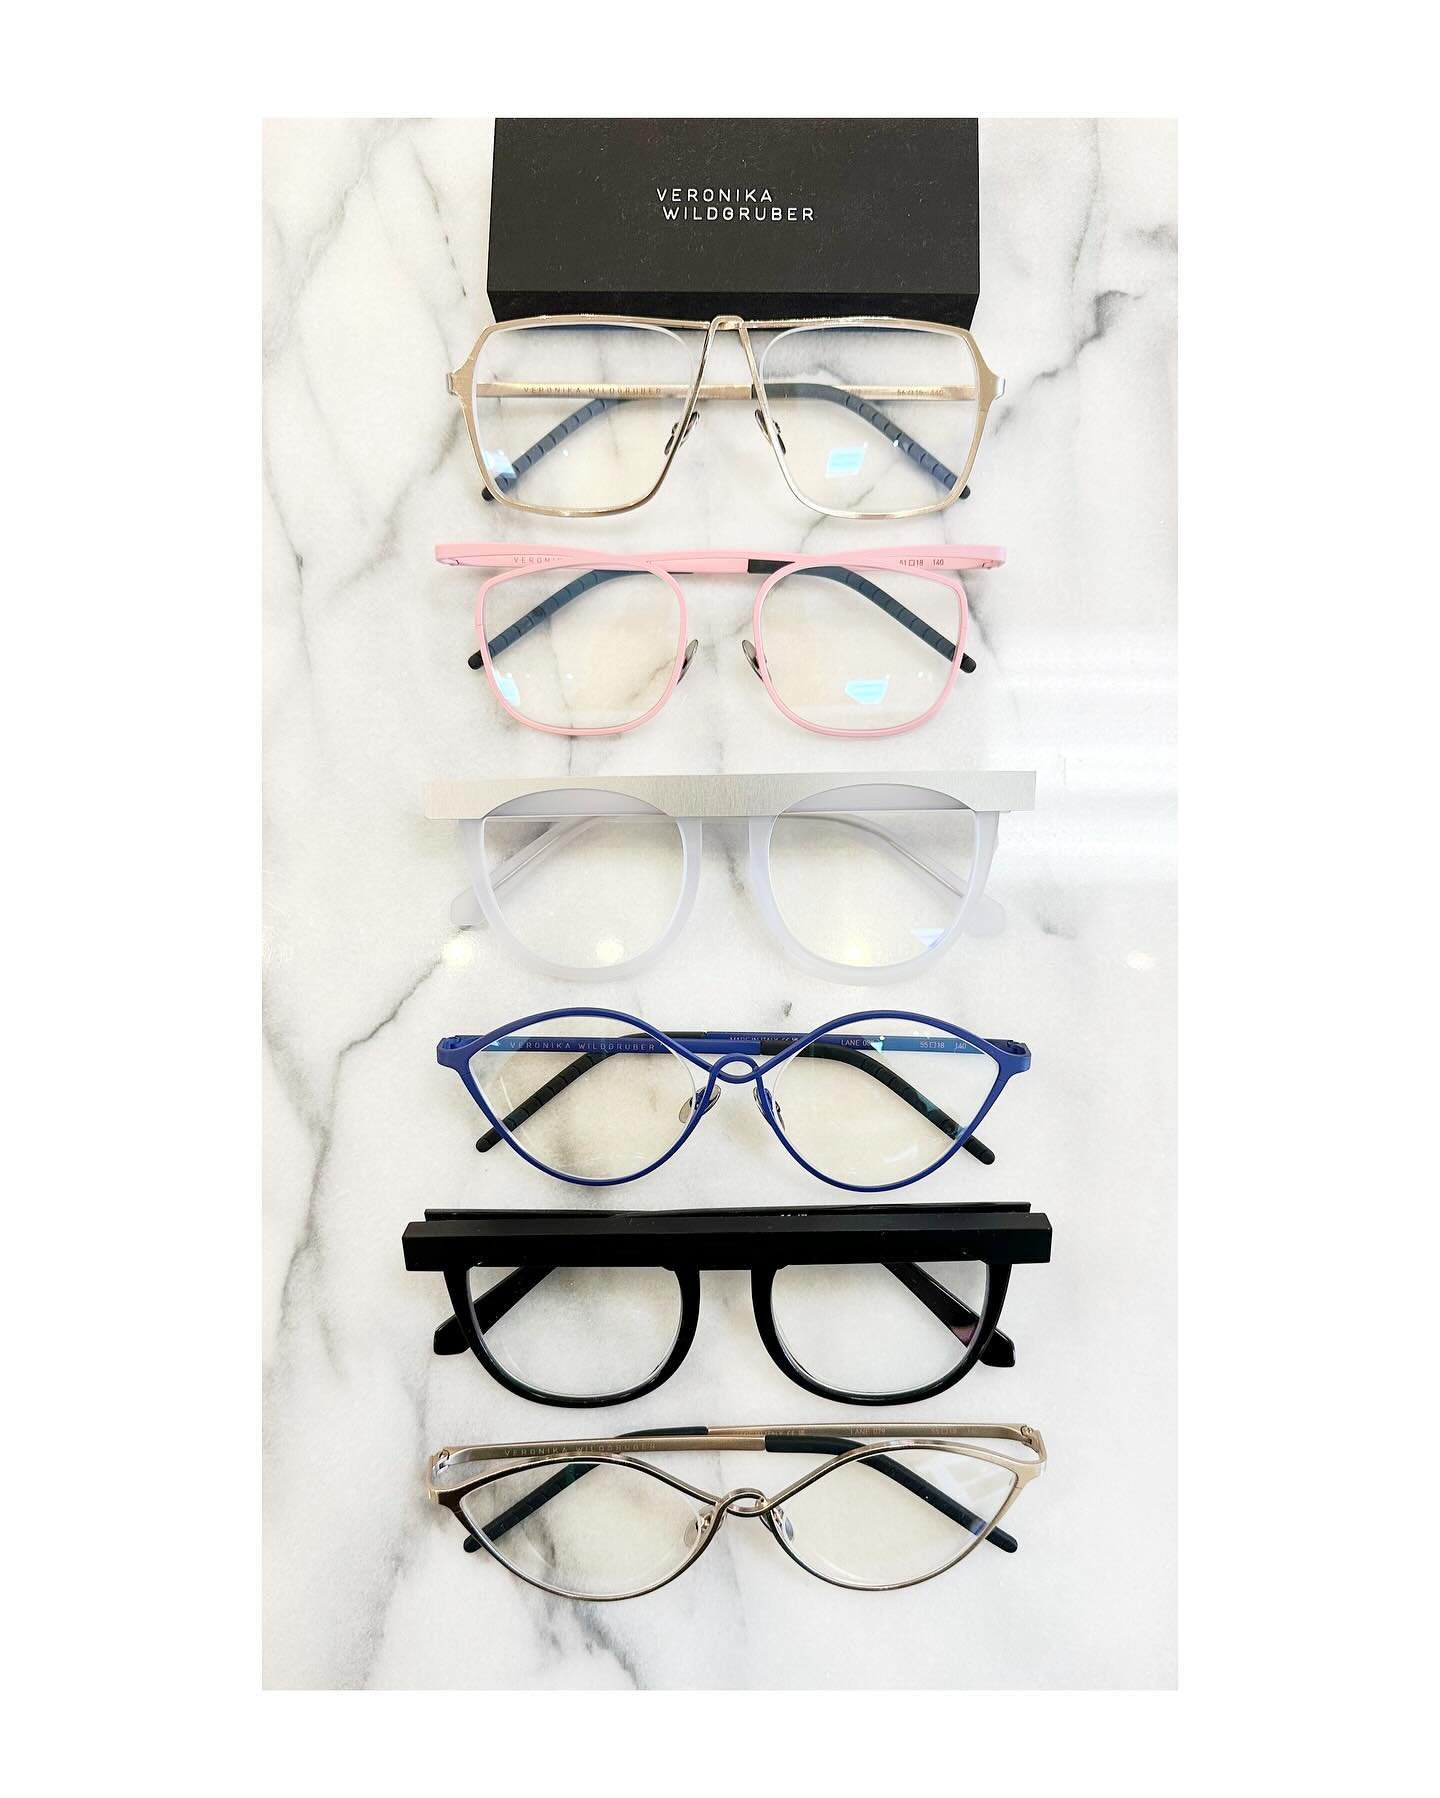 NYC trade show discoveries keep arriving and I can&rsquo;t contain my excitement. We brought in the amazing @veronikawildgrubereyewear which is exquisitely sculptural and unique. It offers new dimensions in eyewear with swoon-worthy details for all o